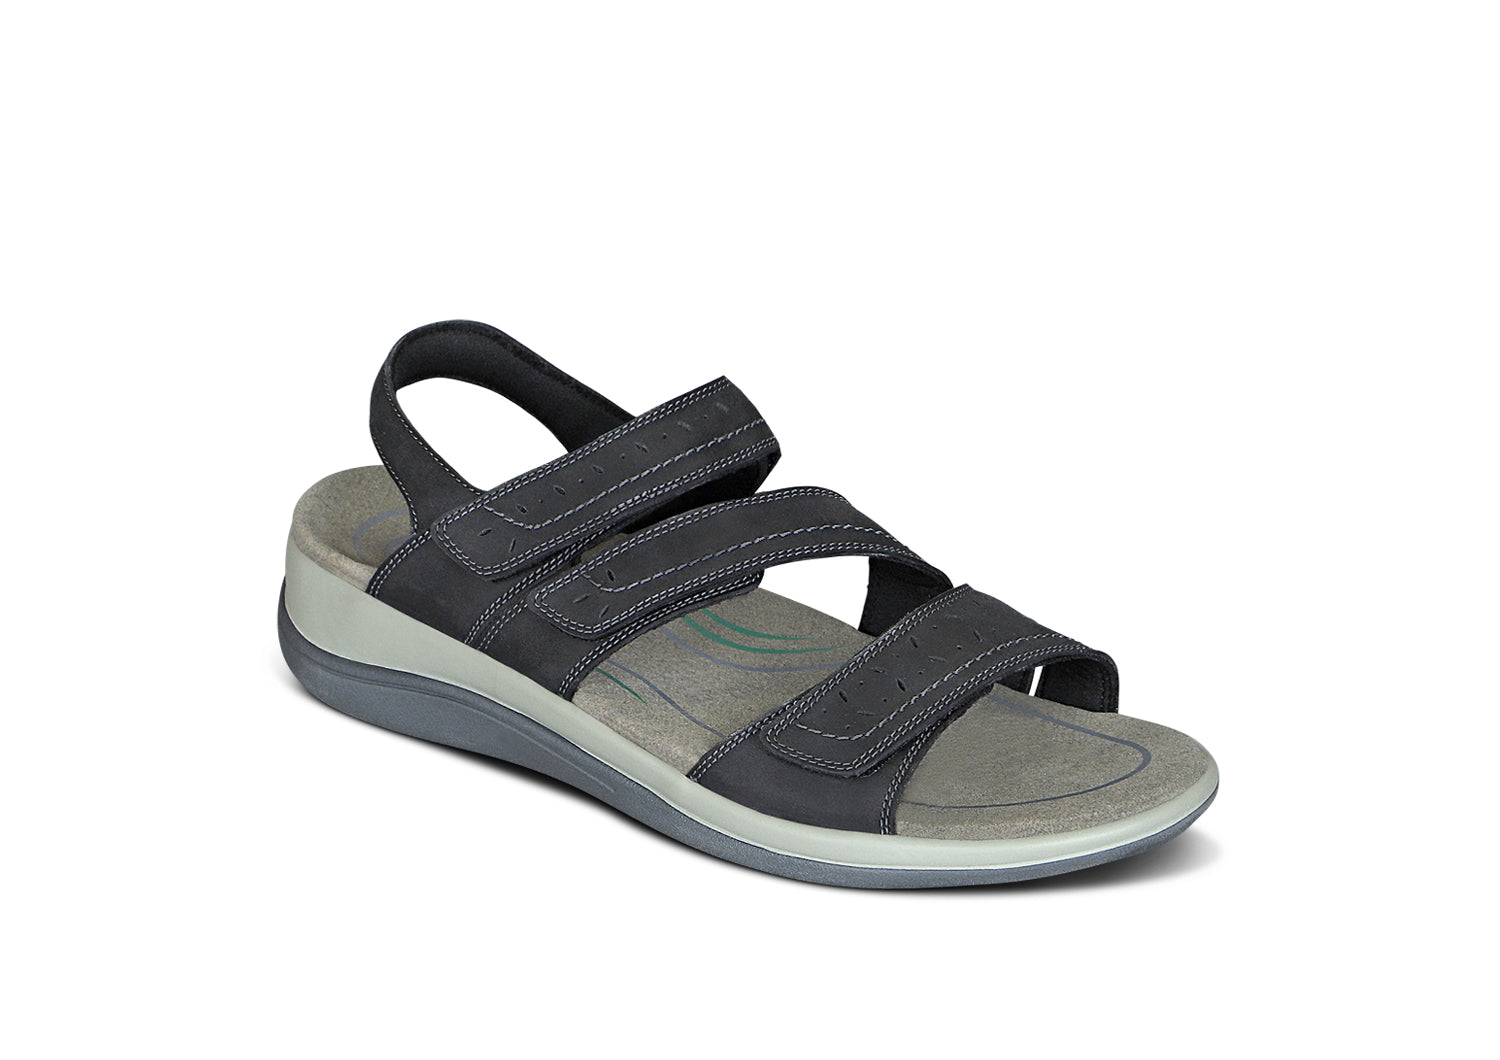 5 Stylish Orthotic Friendly Sandals with Removable Footbeds